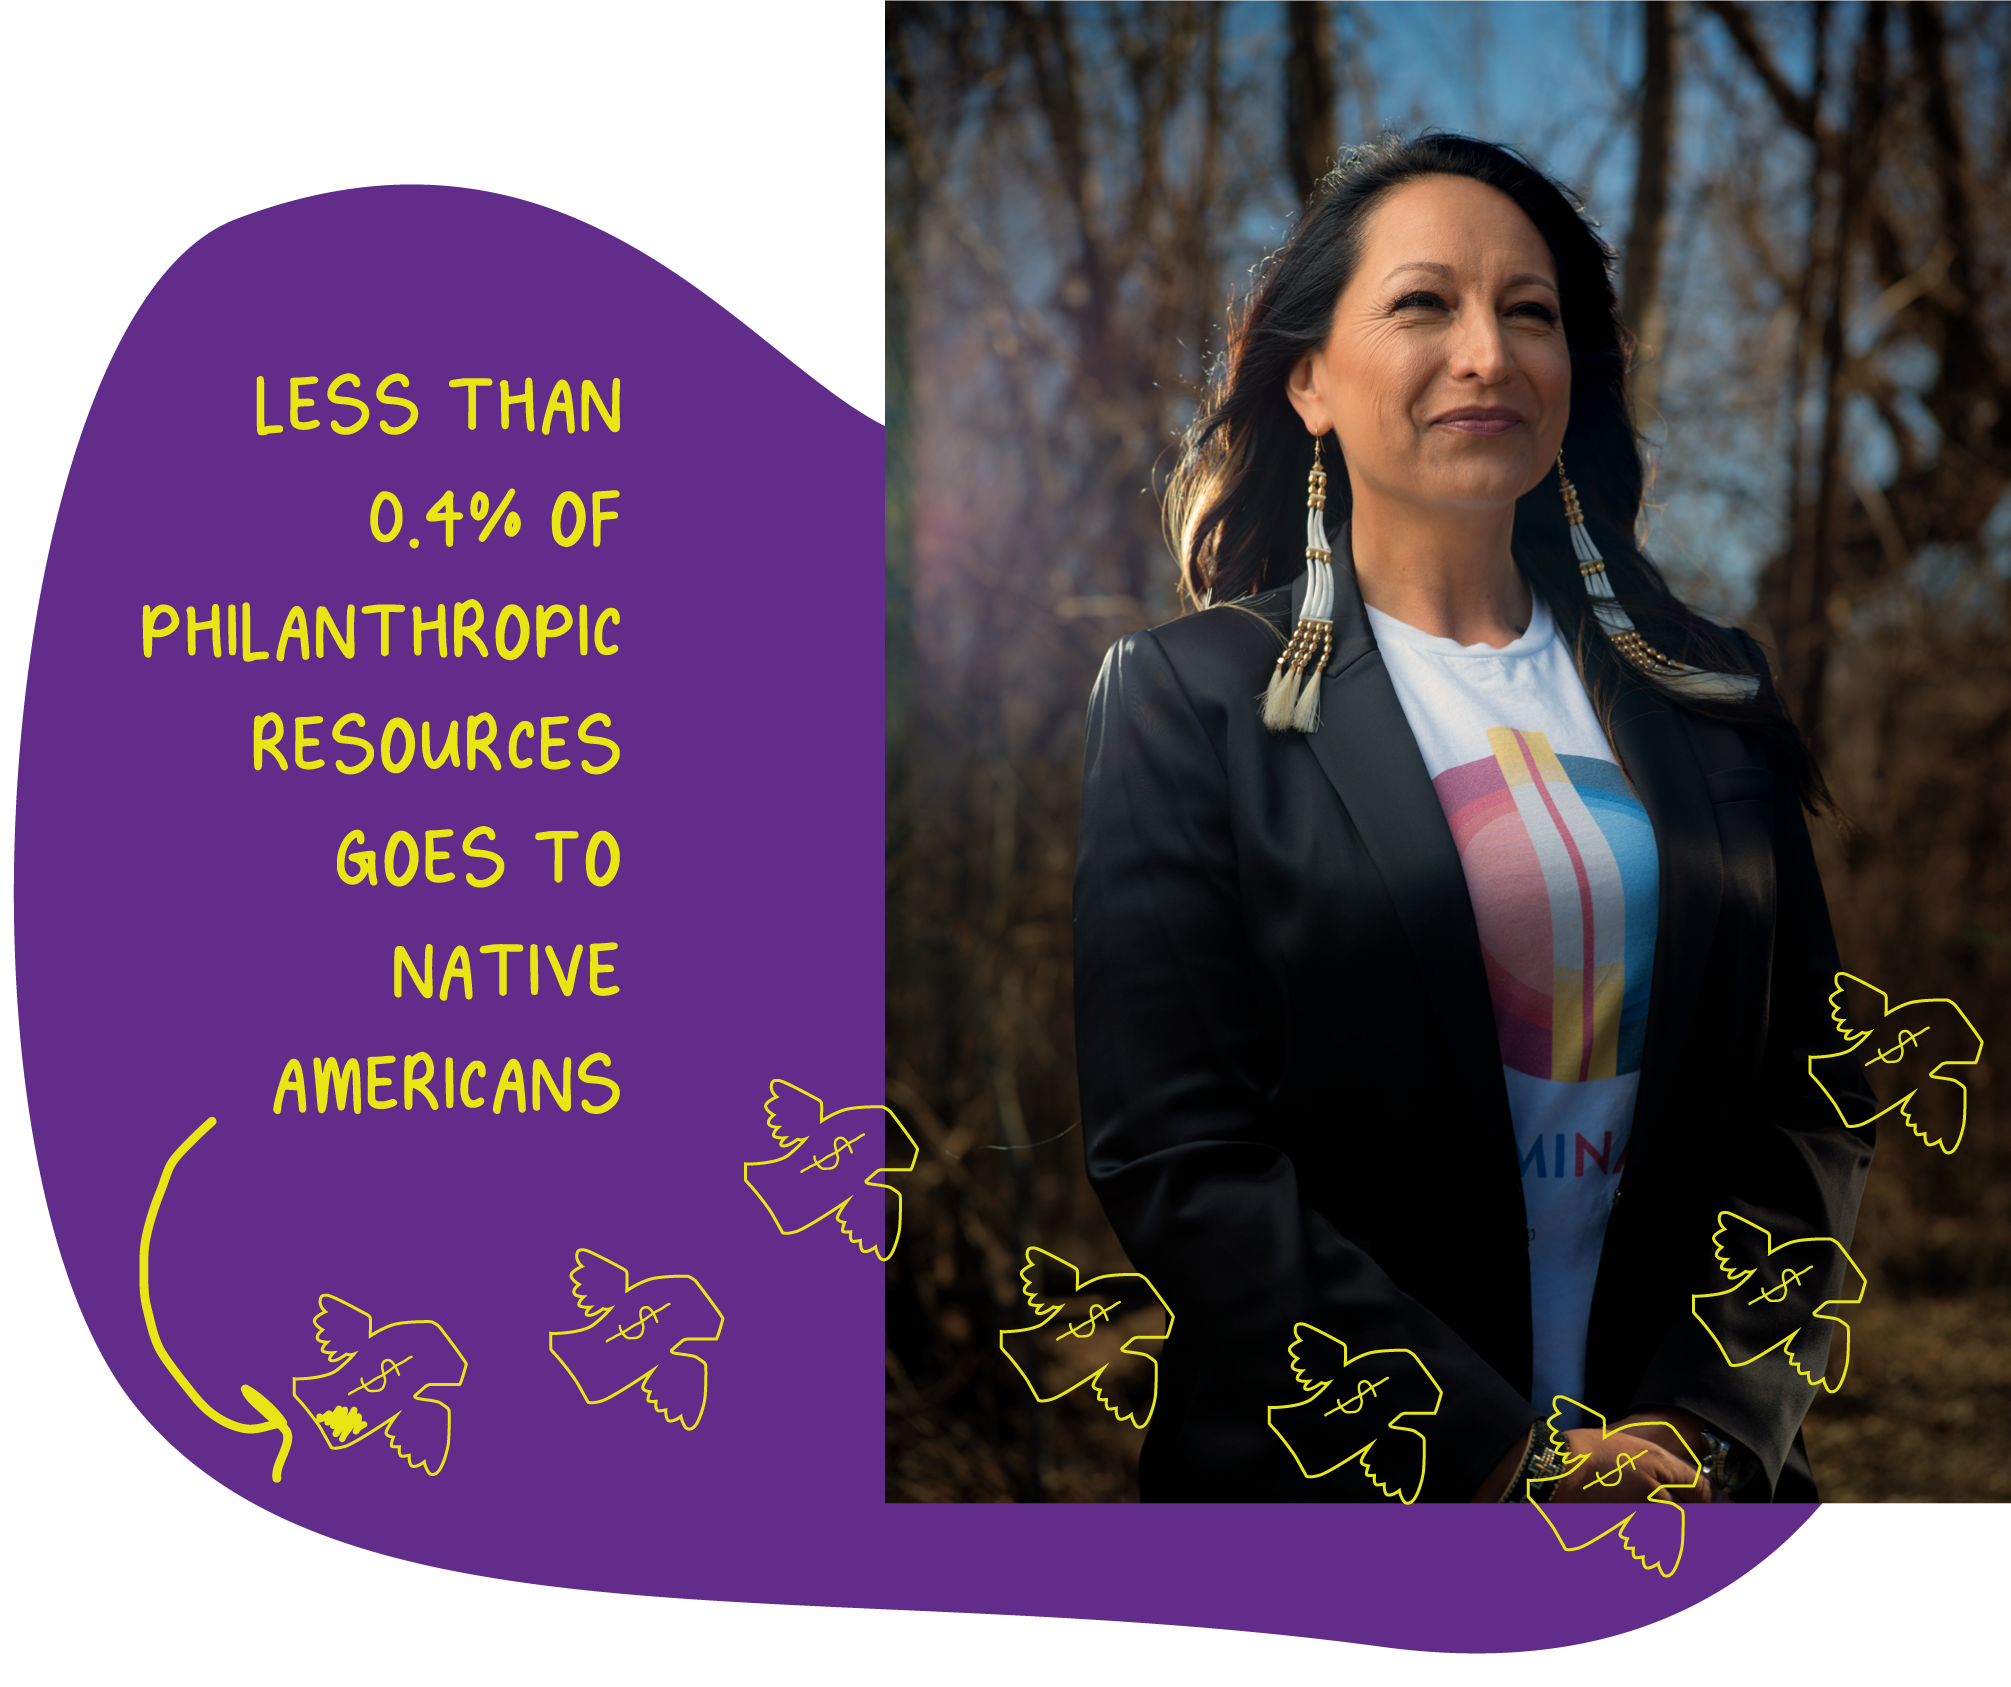 A headshot of Crystal Echo Hawk, Executive Director of Illuminative. The text says "Less than 0.4% of Philanthropic Resources goes to Native Americans."